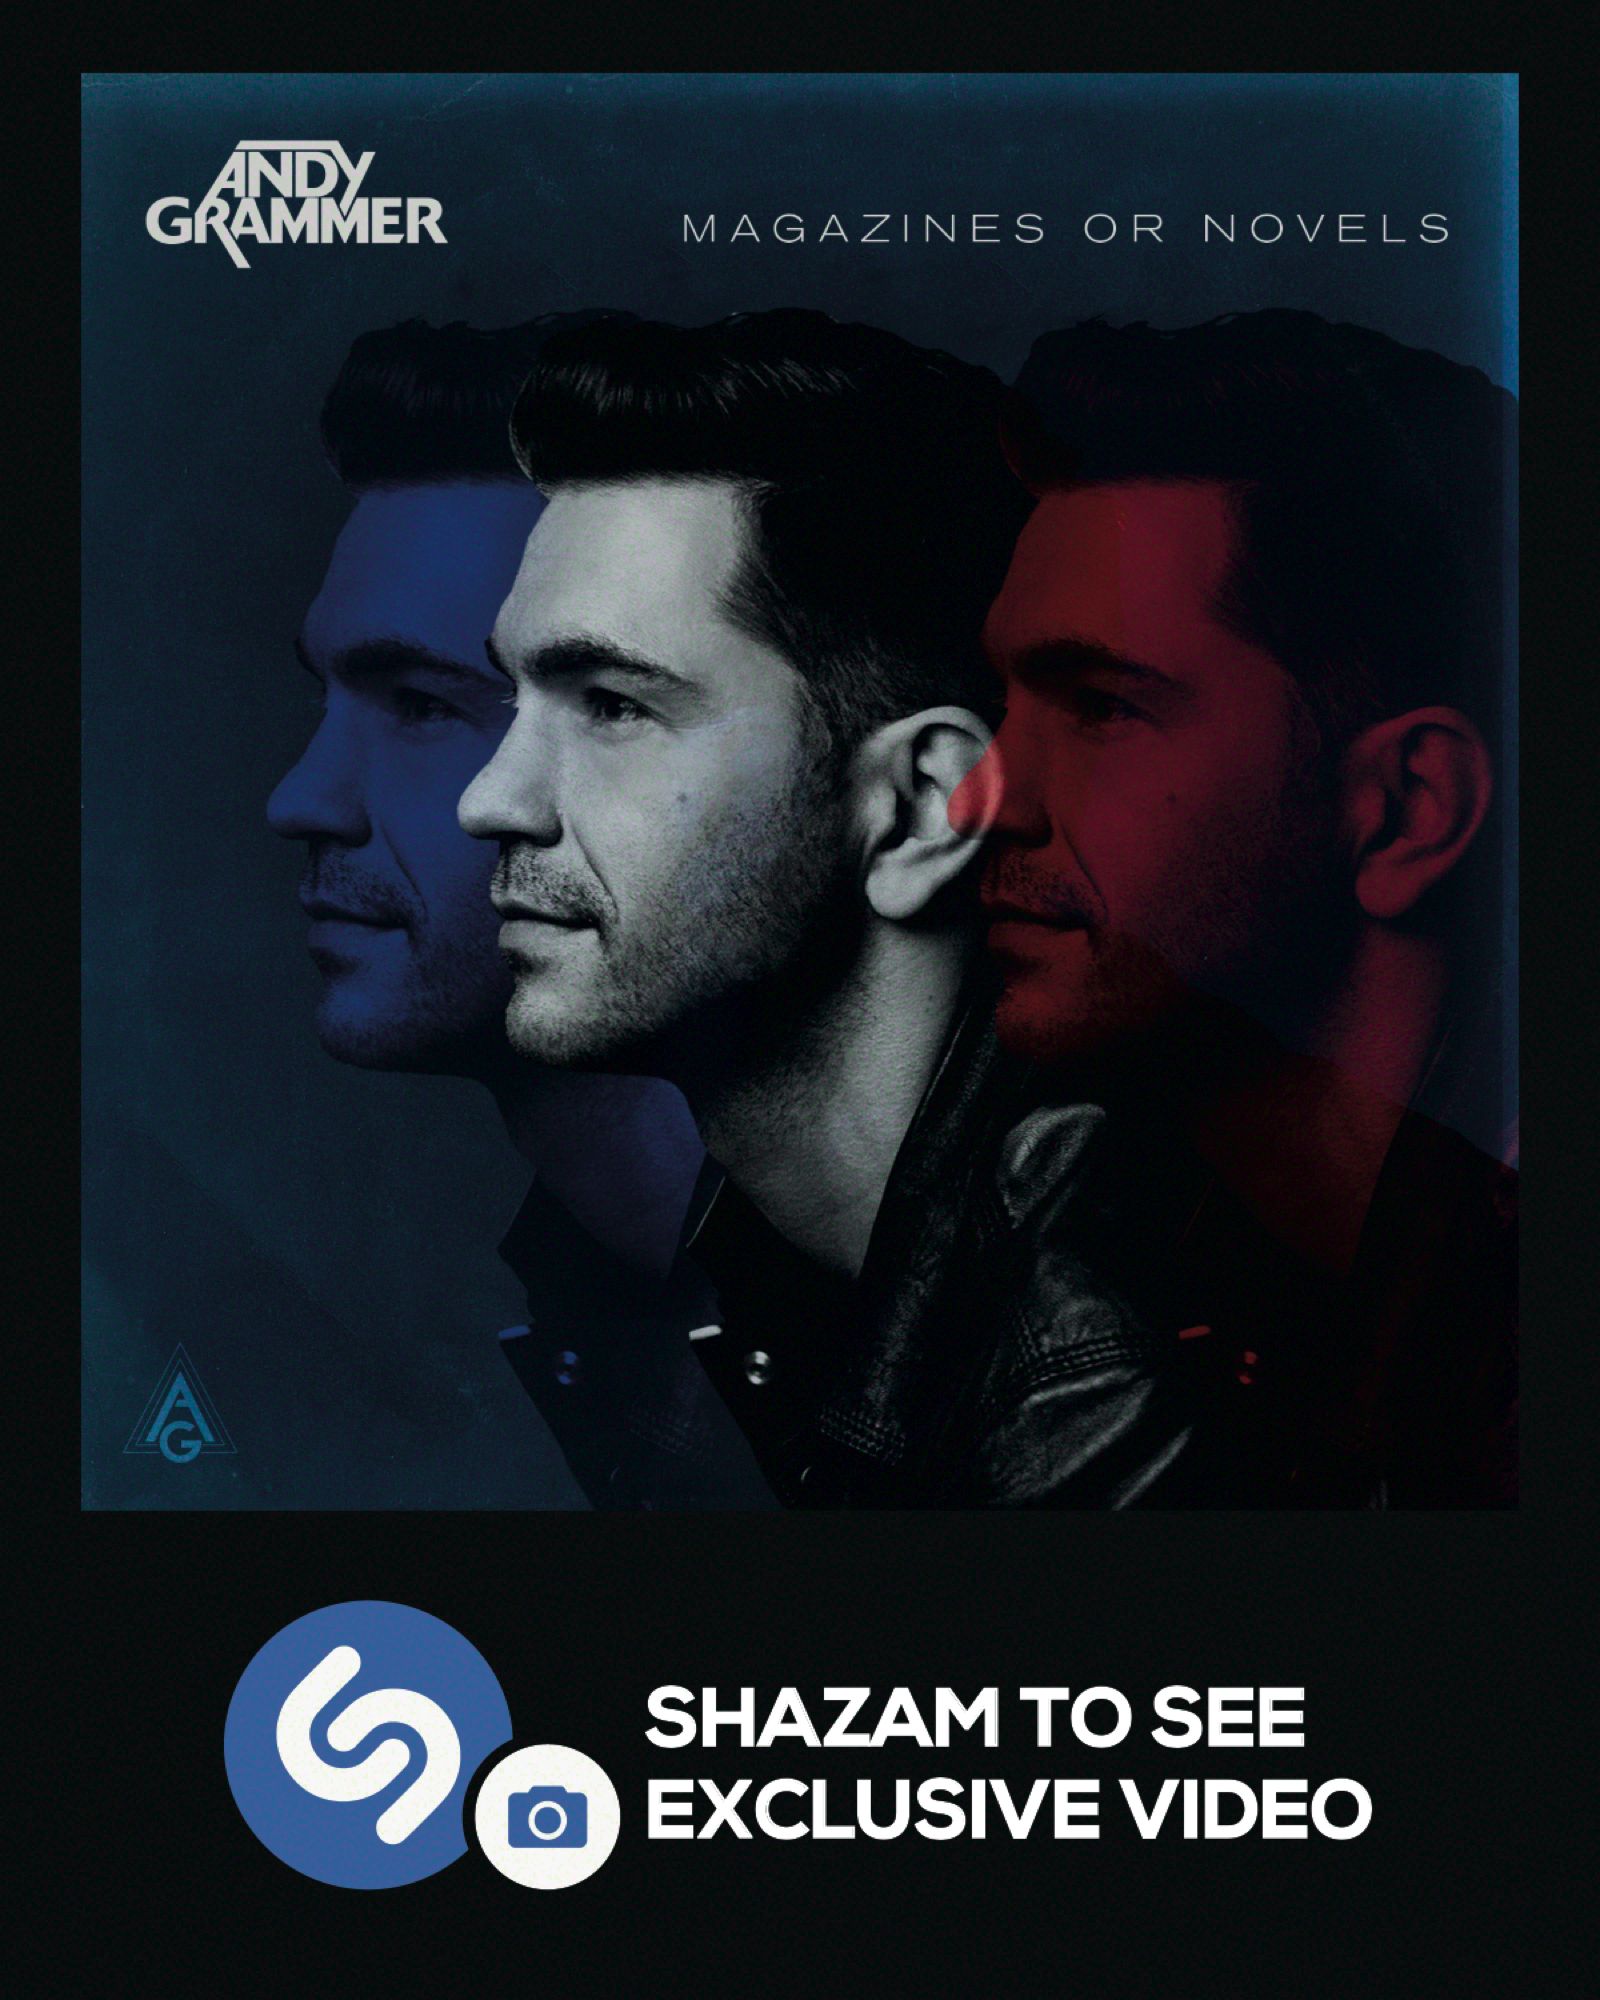 shazam visual now augments pictures as well as audio image 3